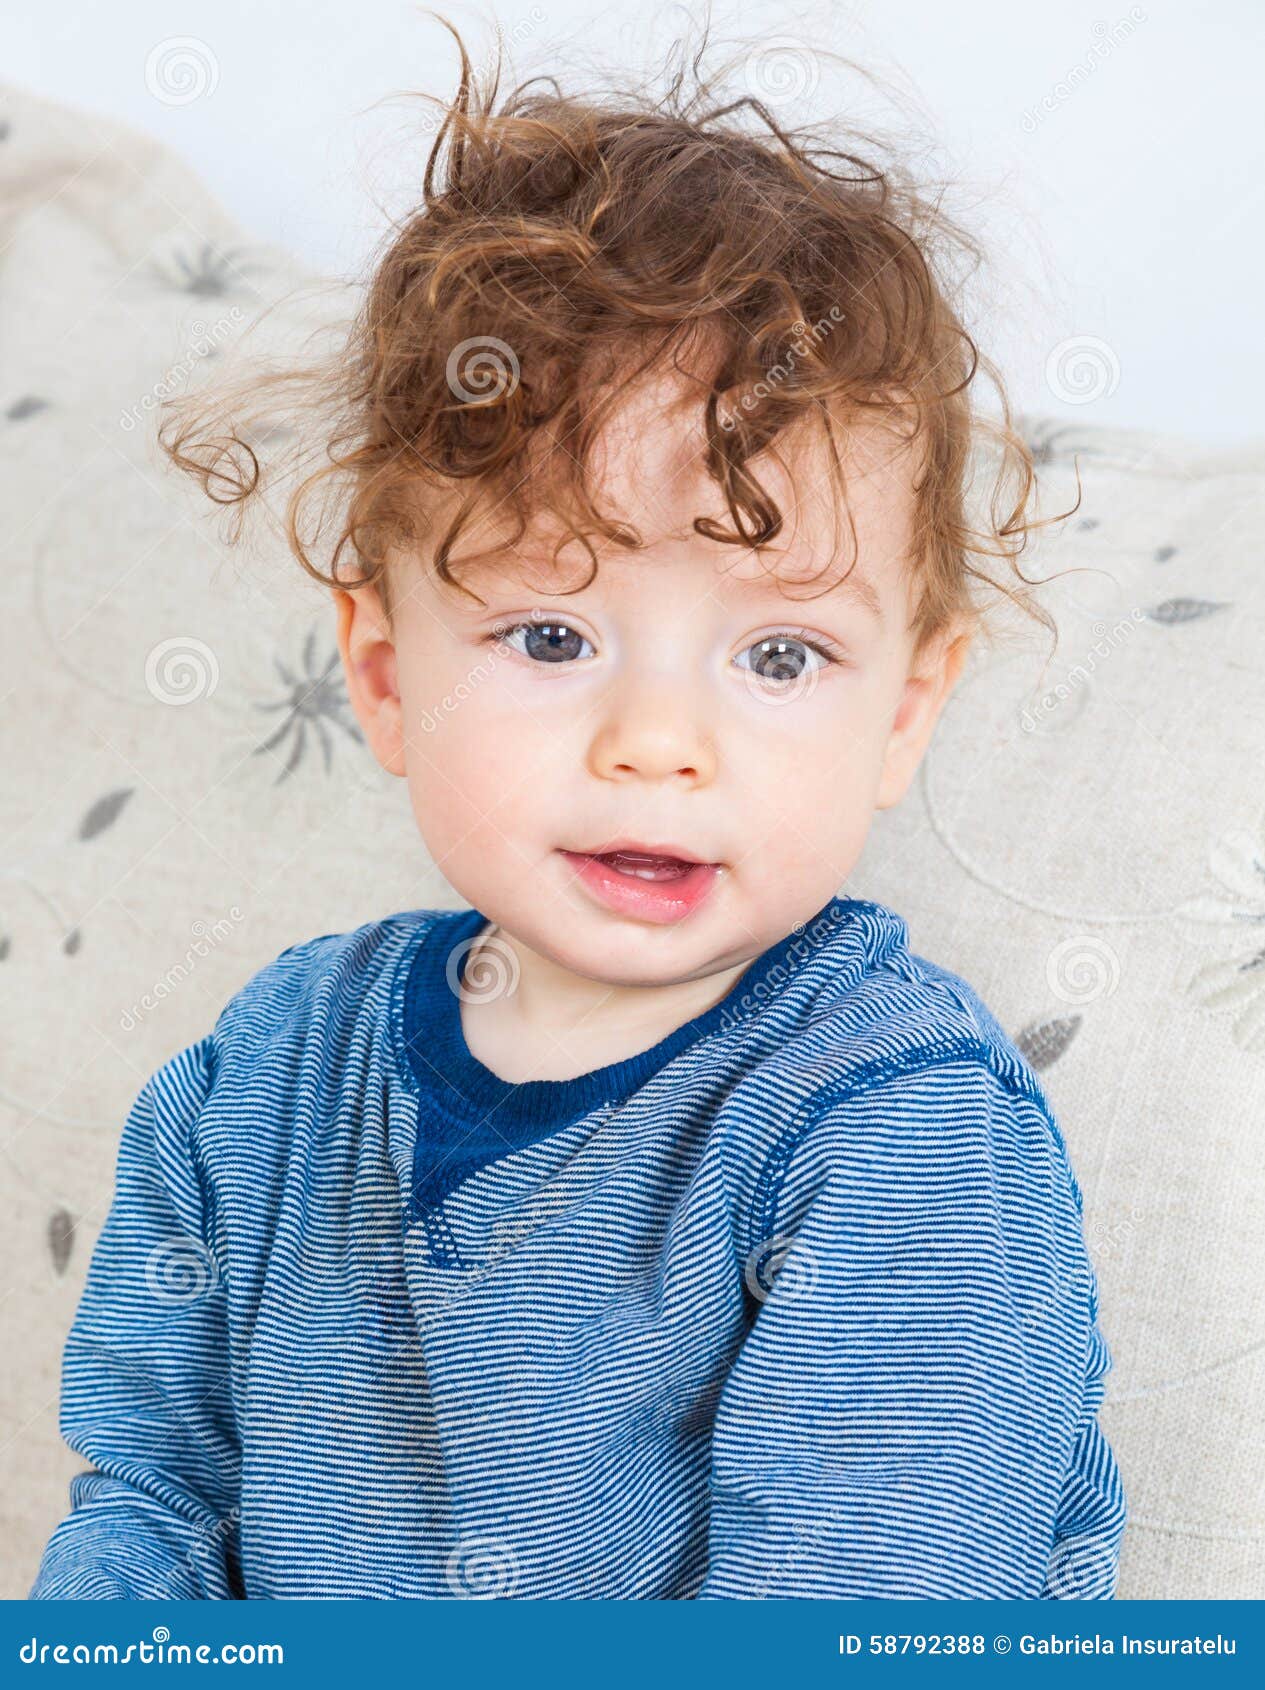 baby boy with curly hair stock photo. image of person - 58792388